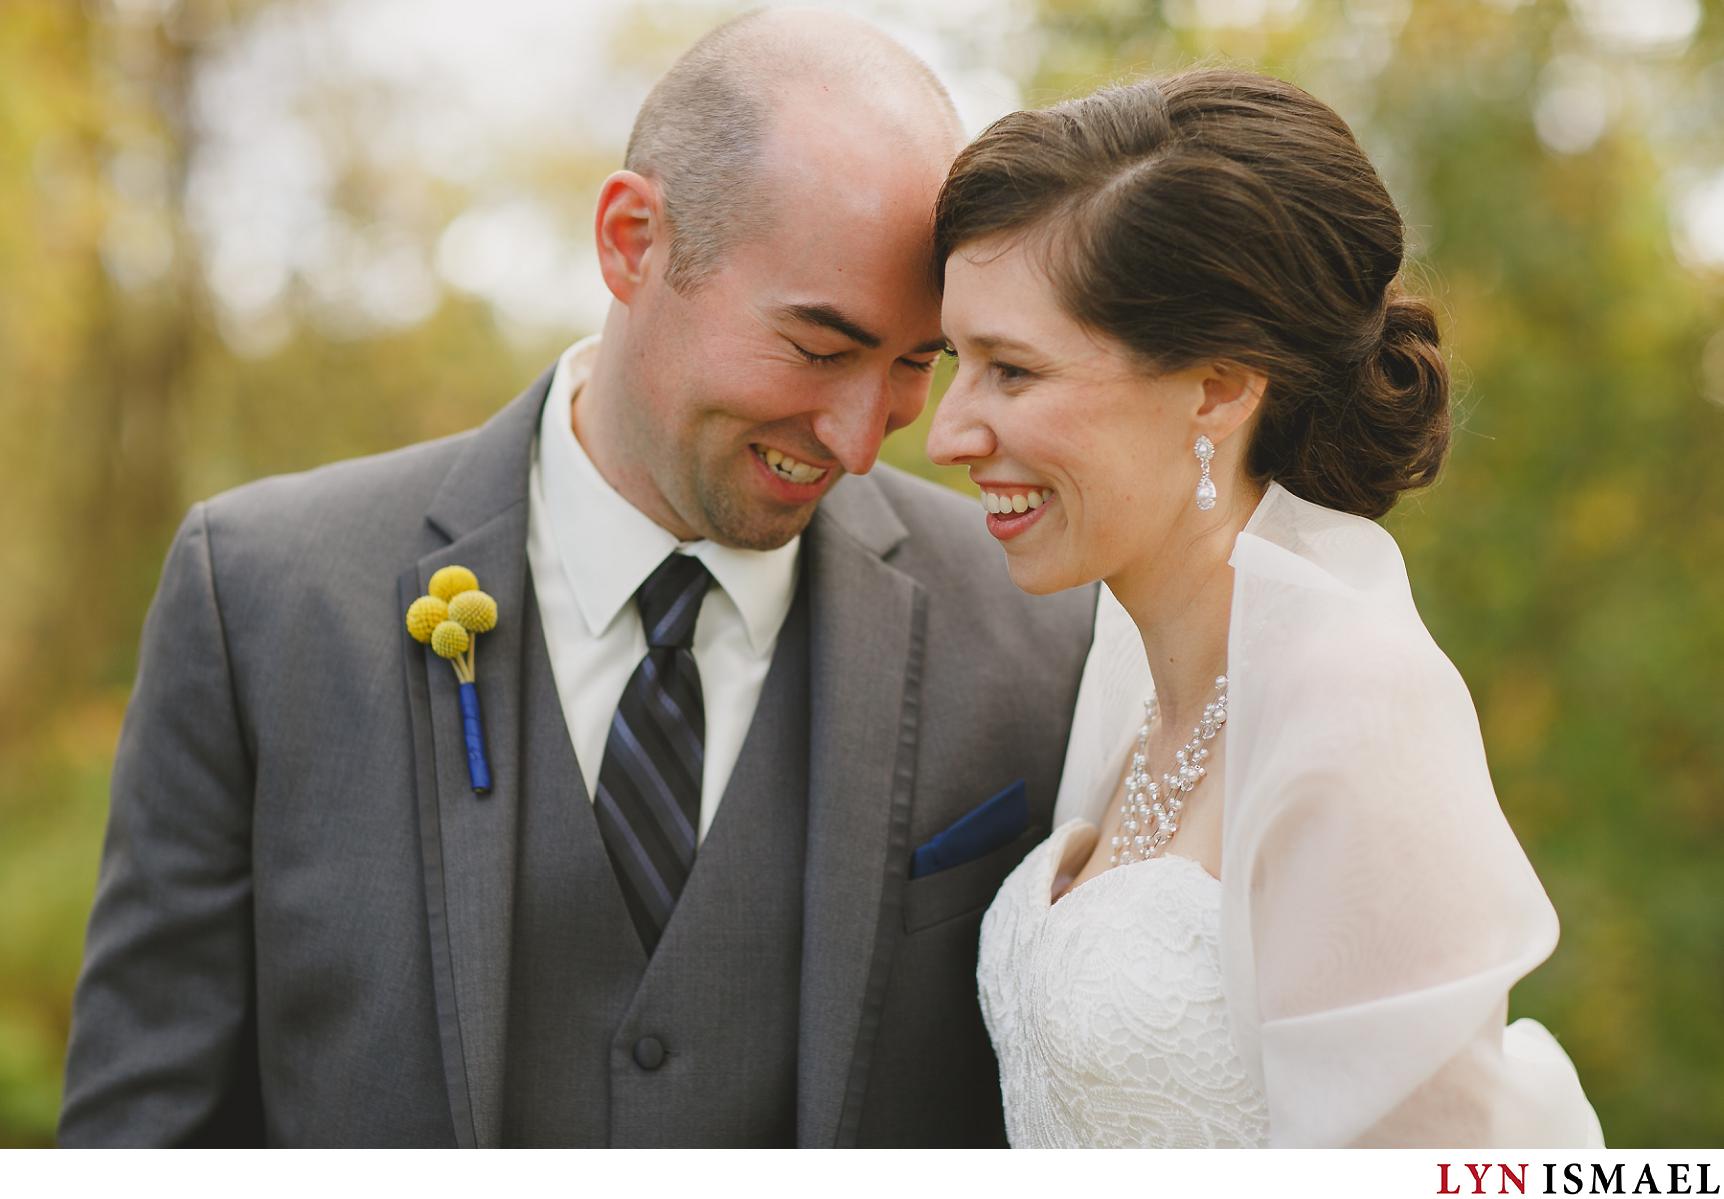 A beautiful natural portrait of the bride and groom in the fall.